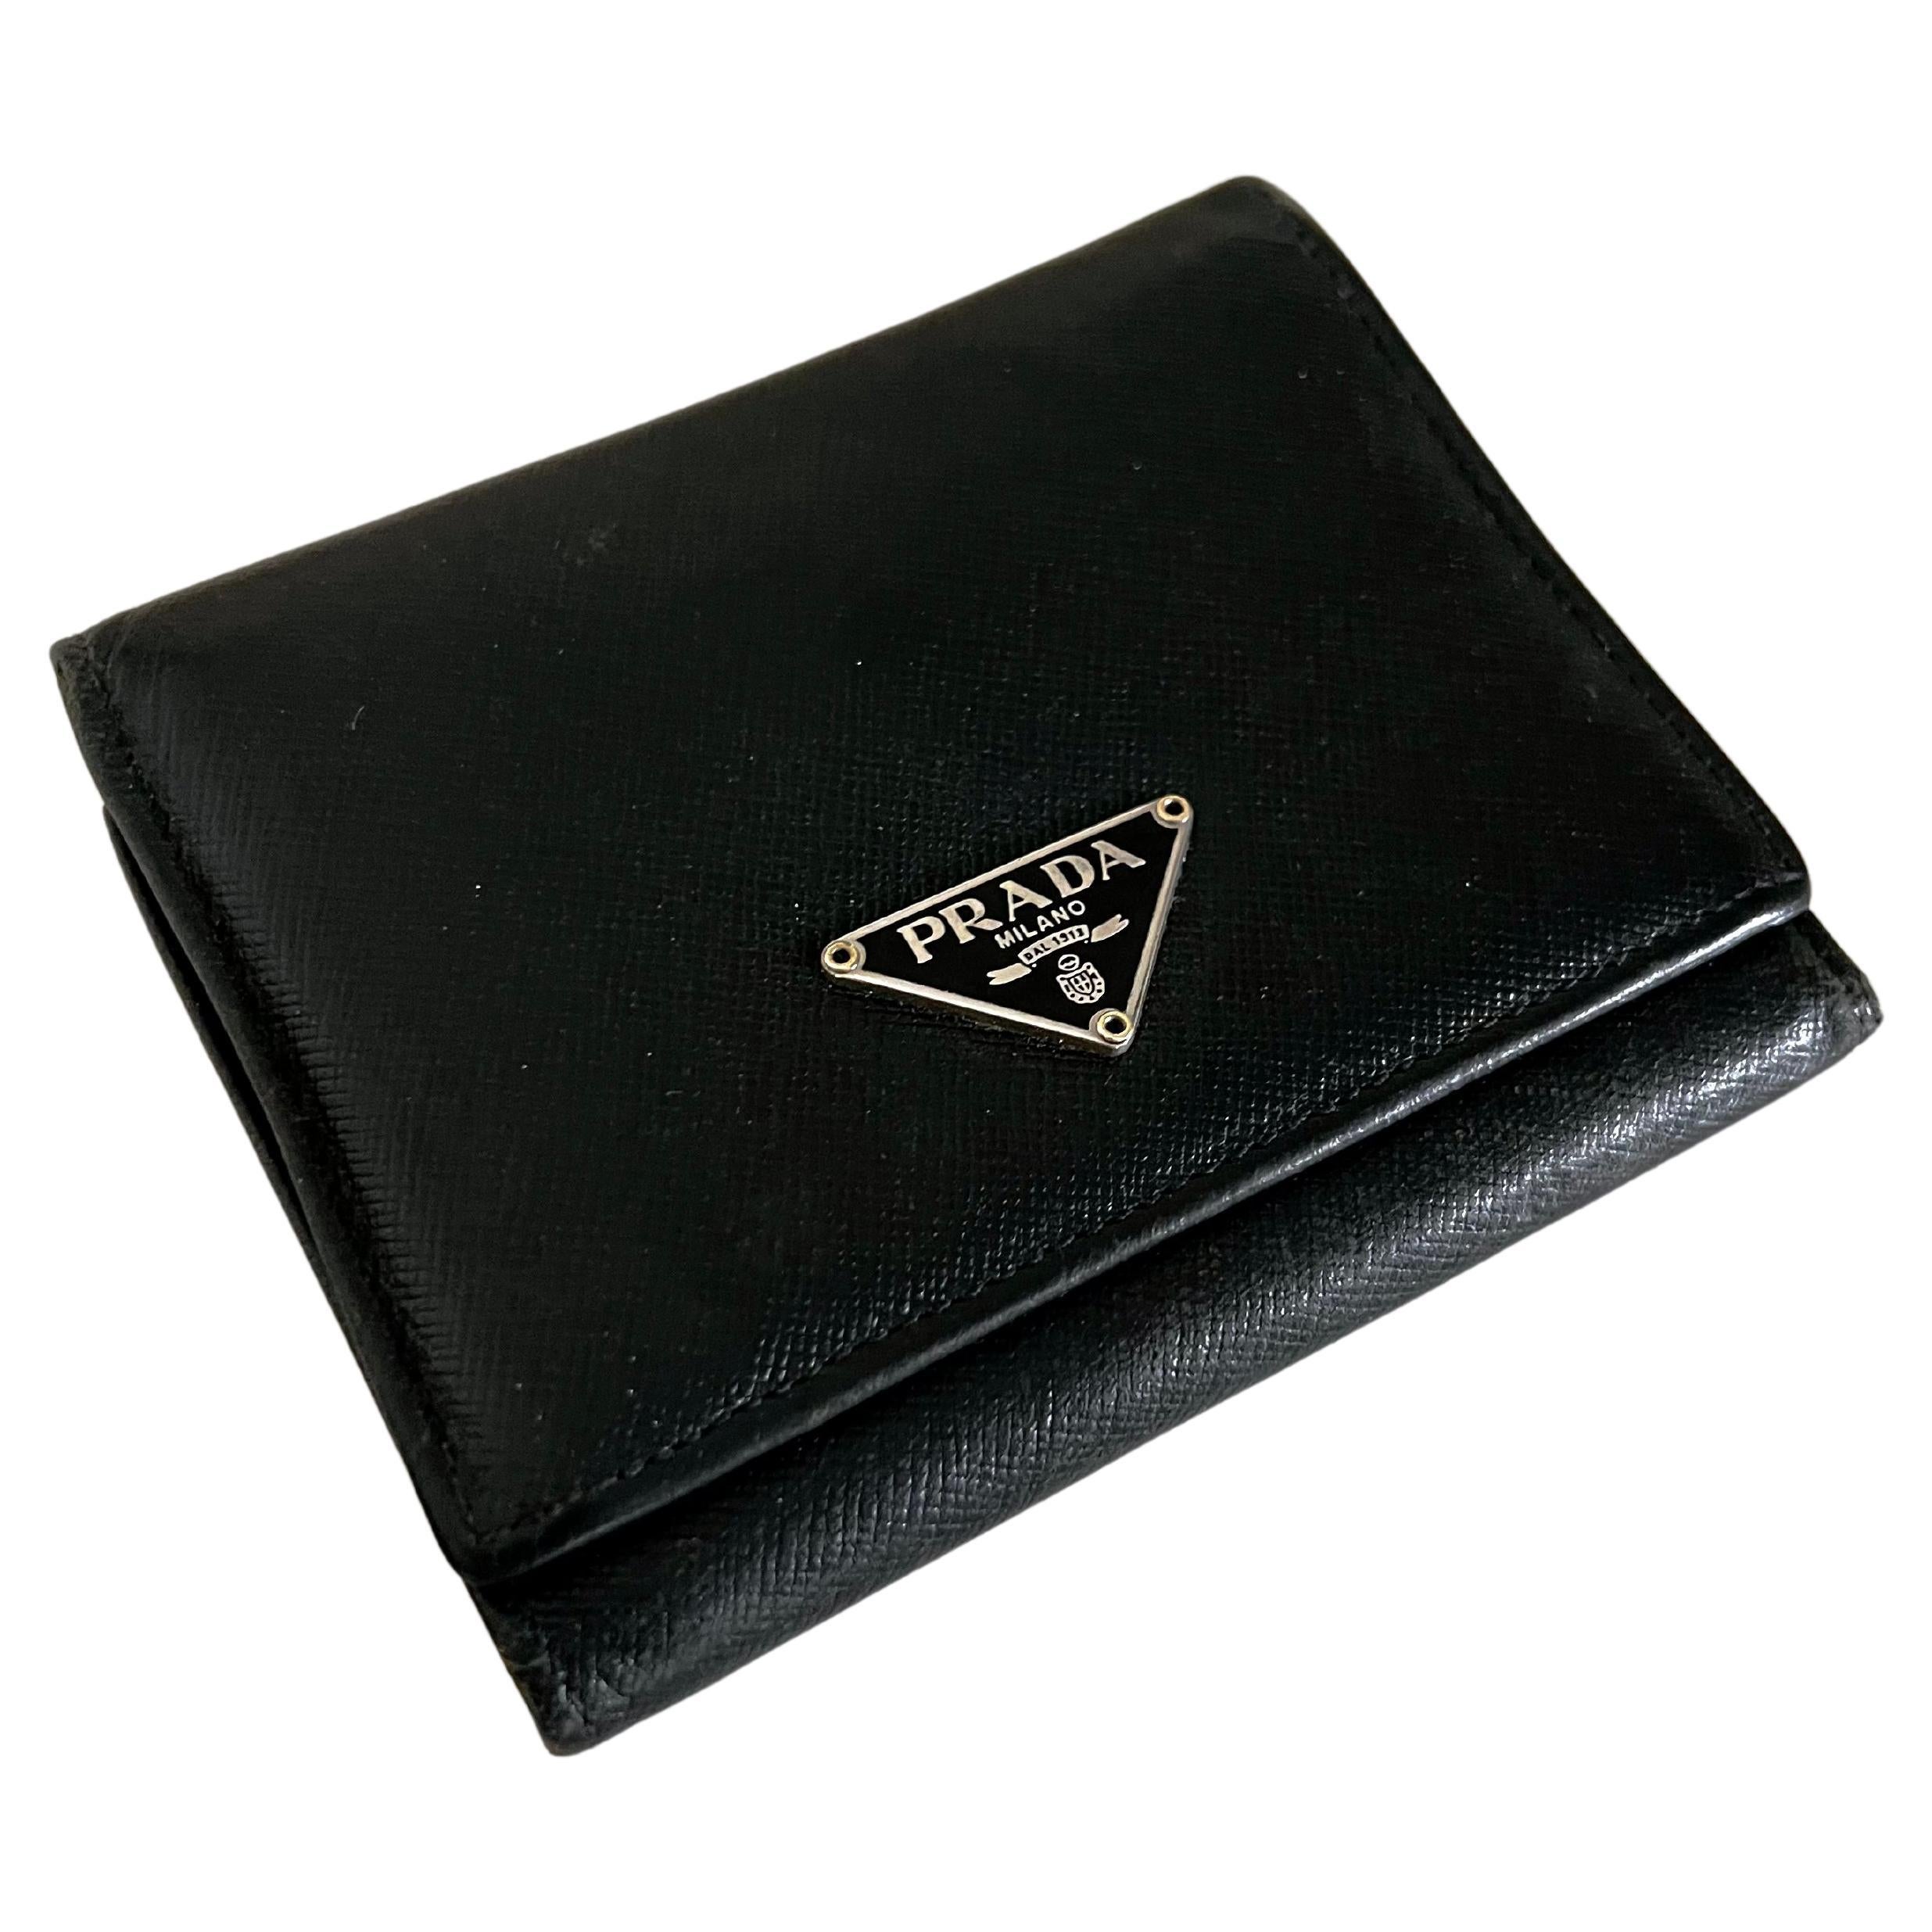 Prada Unisex Tri Fold Wallet with many Compartments